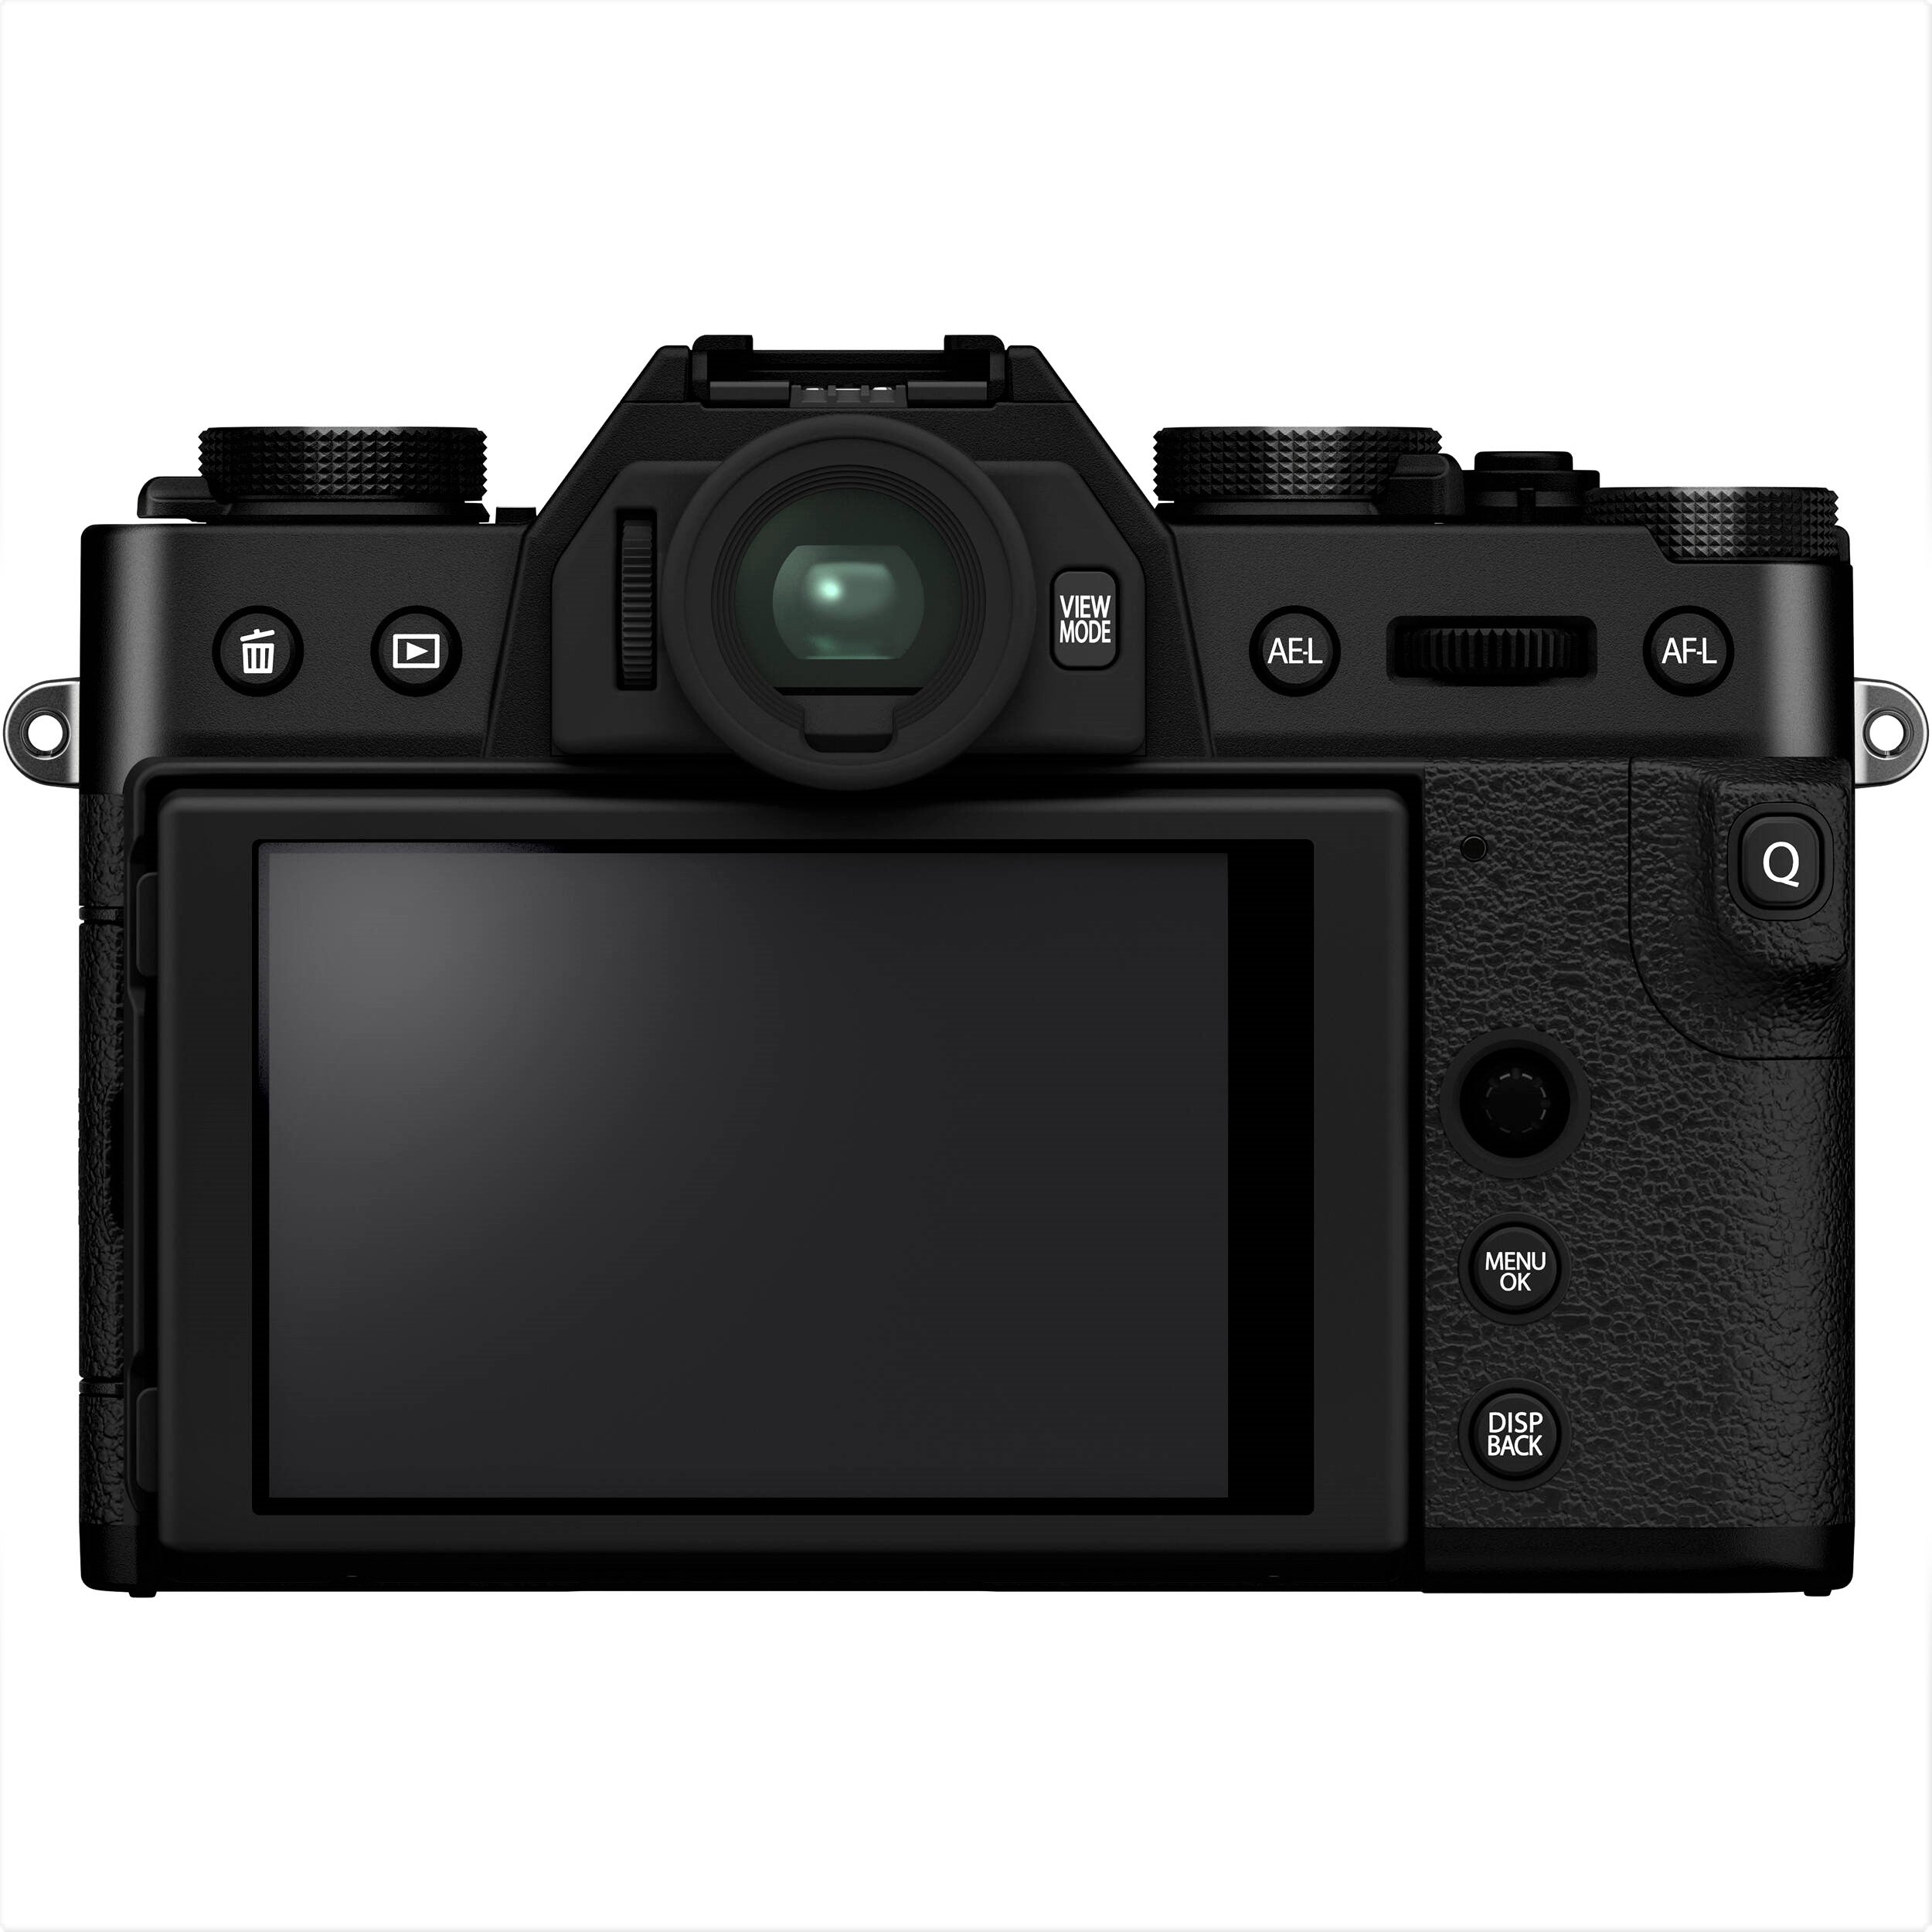 Fujifilm X-T30 Mark II to be Announced on September 2 - Camera